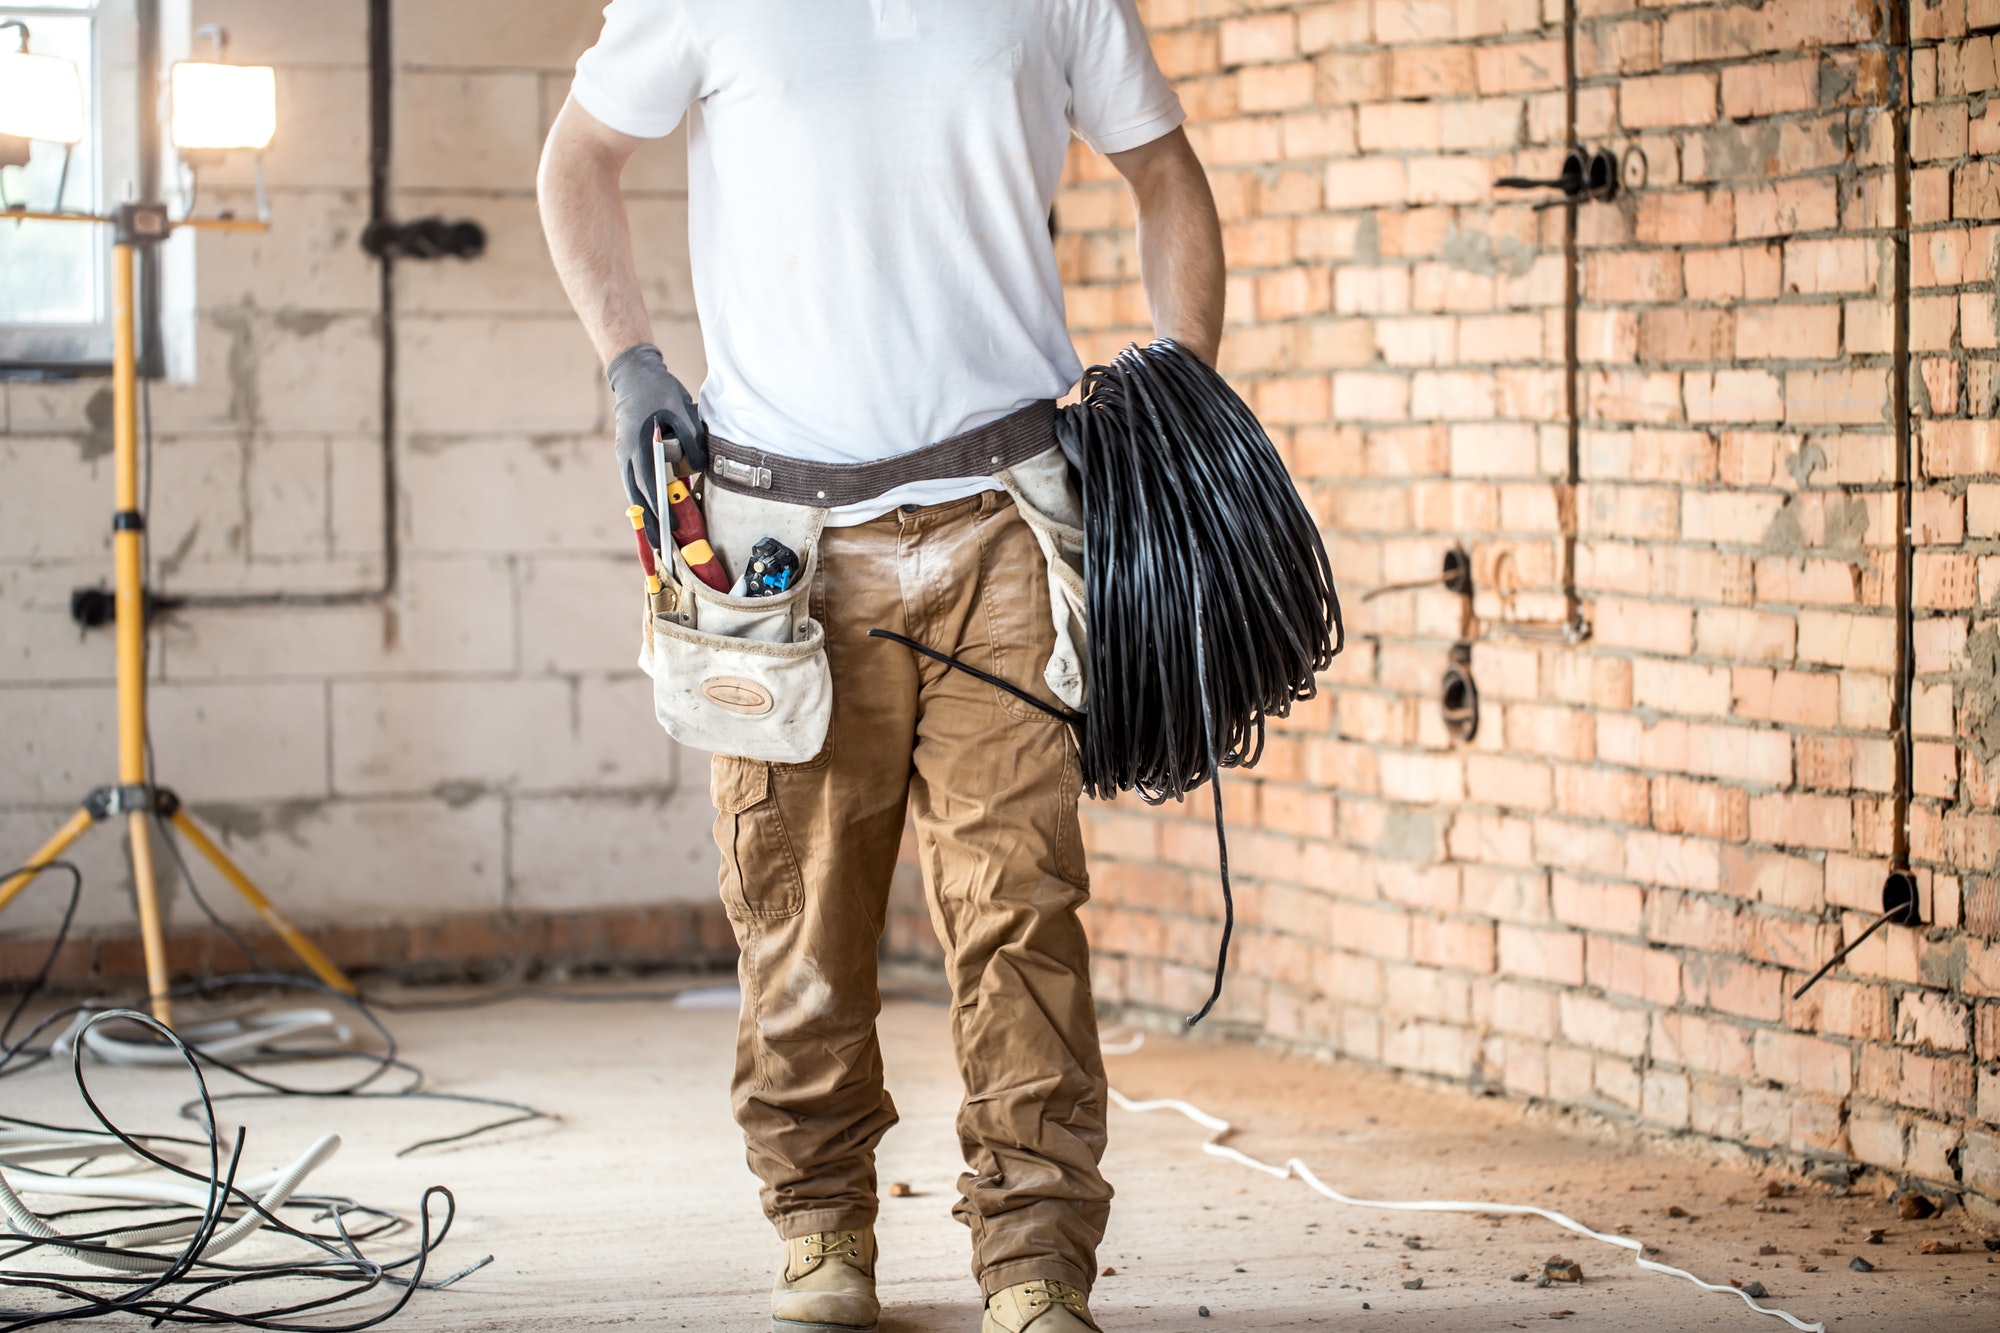 Electrician with tools, working on a construction site. Repair and handyman concept.